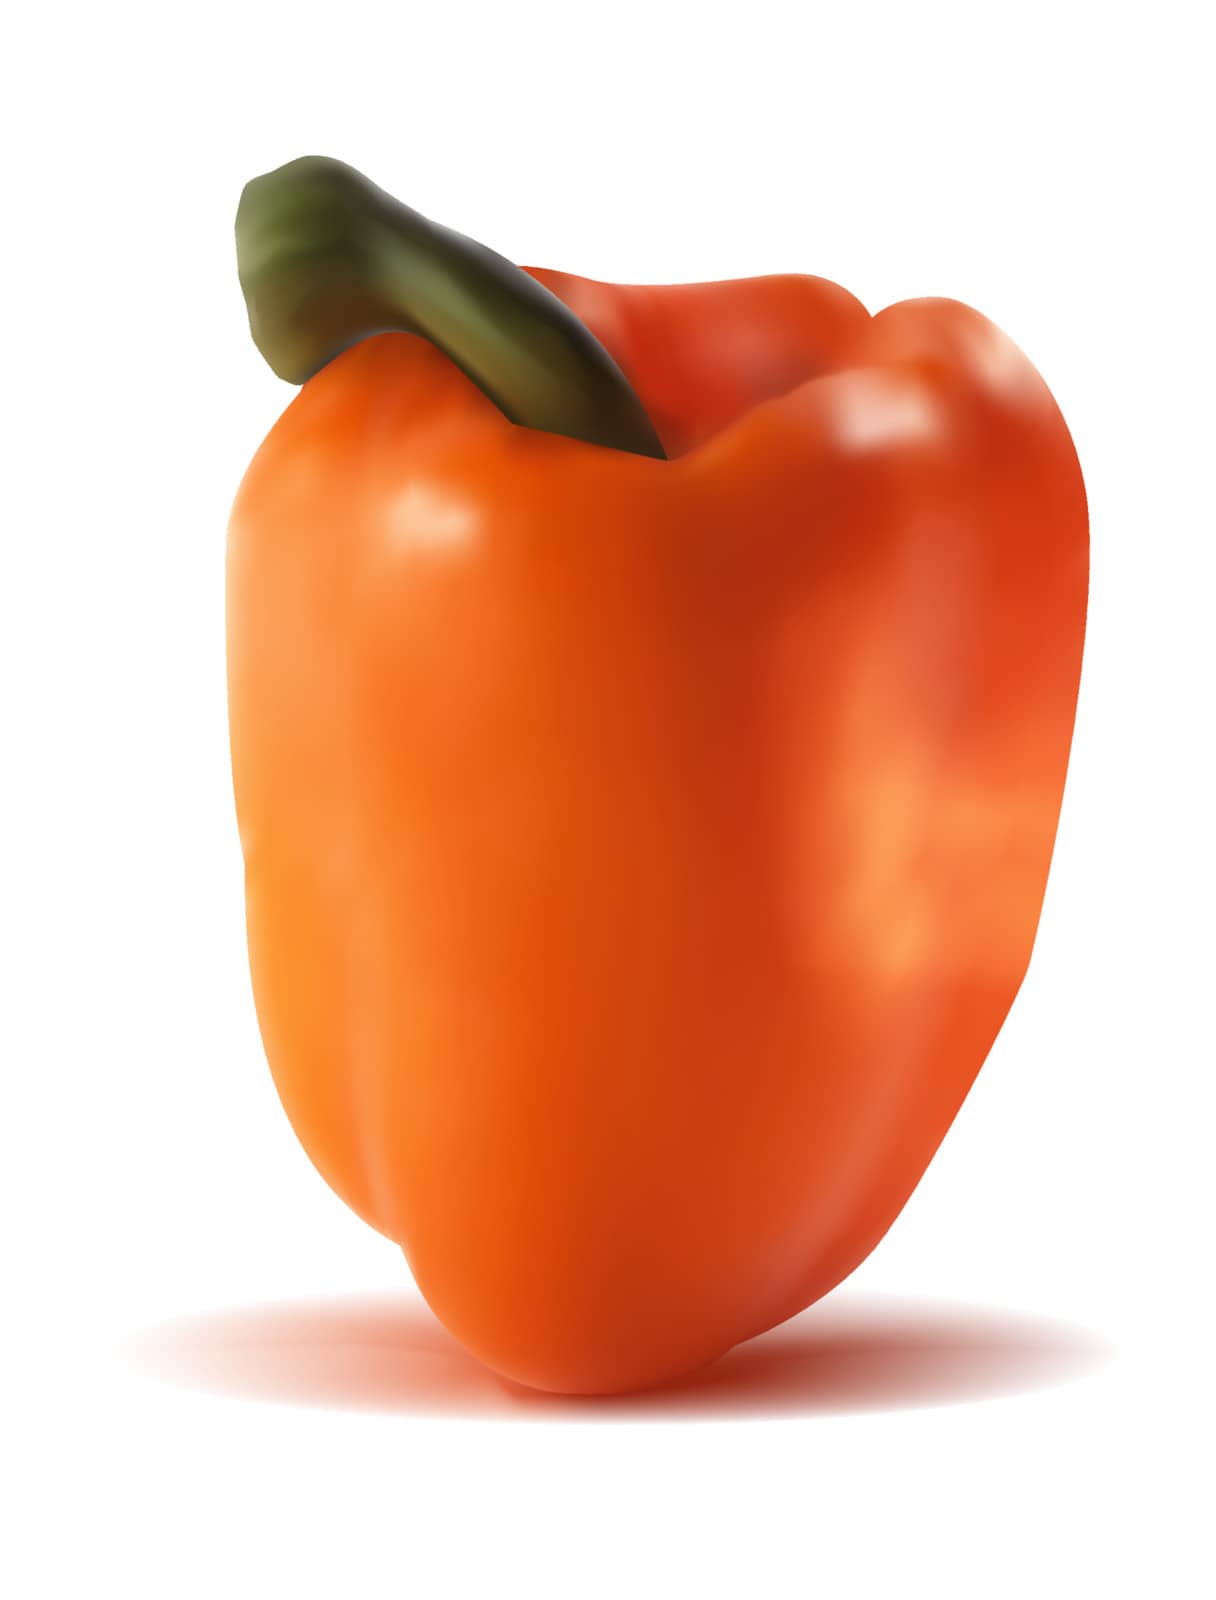 Photo realistic vector illustration of orange sweet pepper. EPS 8 vector file included